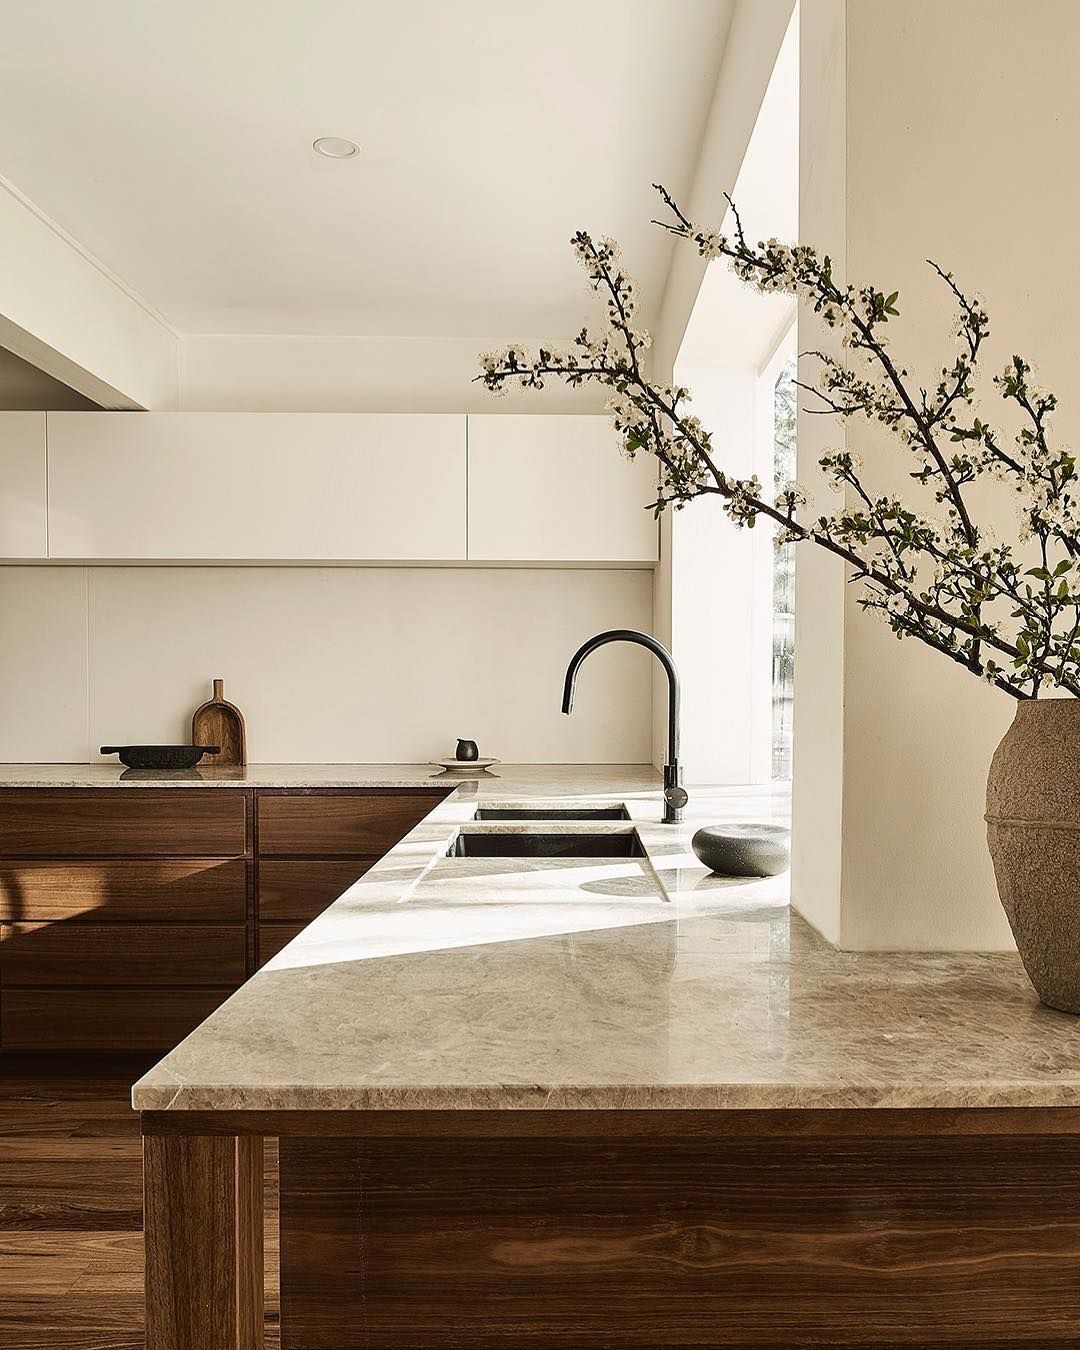 Michelle Halford on Instagram: “TDC BLOG | An exquisite kitchen and the first interior project by Melbourne-based @studio_11_11 the use of native timber sets an incredible…” - Michelle Halford on Instagram: “TDC BLOG | An exquisite kitchen and the first interior project by Melbourne-based @studio_11_11 the use of native timber sets an incredible…” -   14 fitness Interior wood ideas